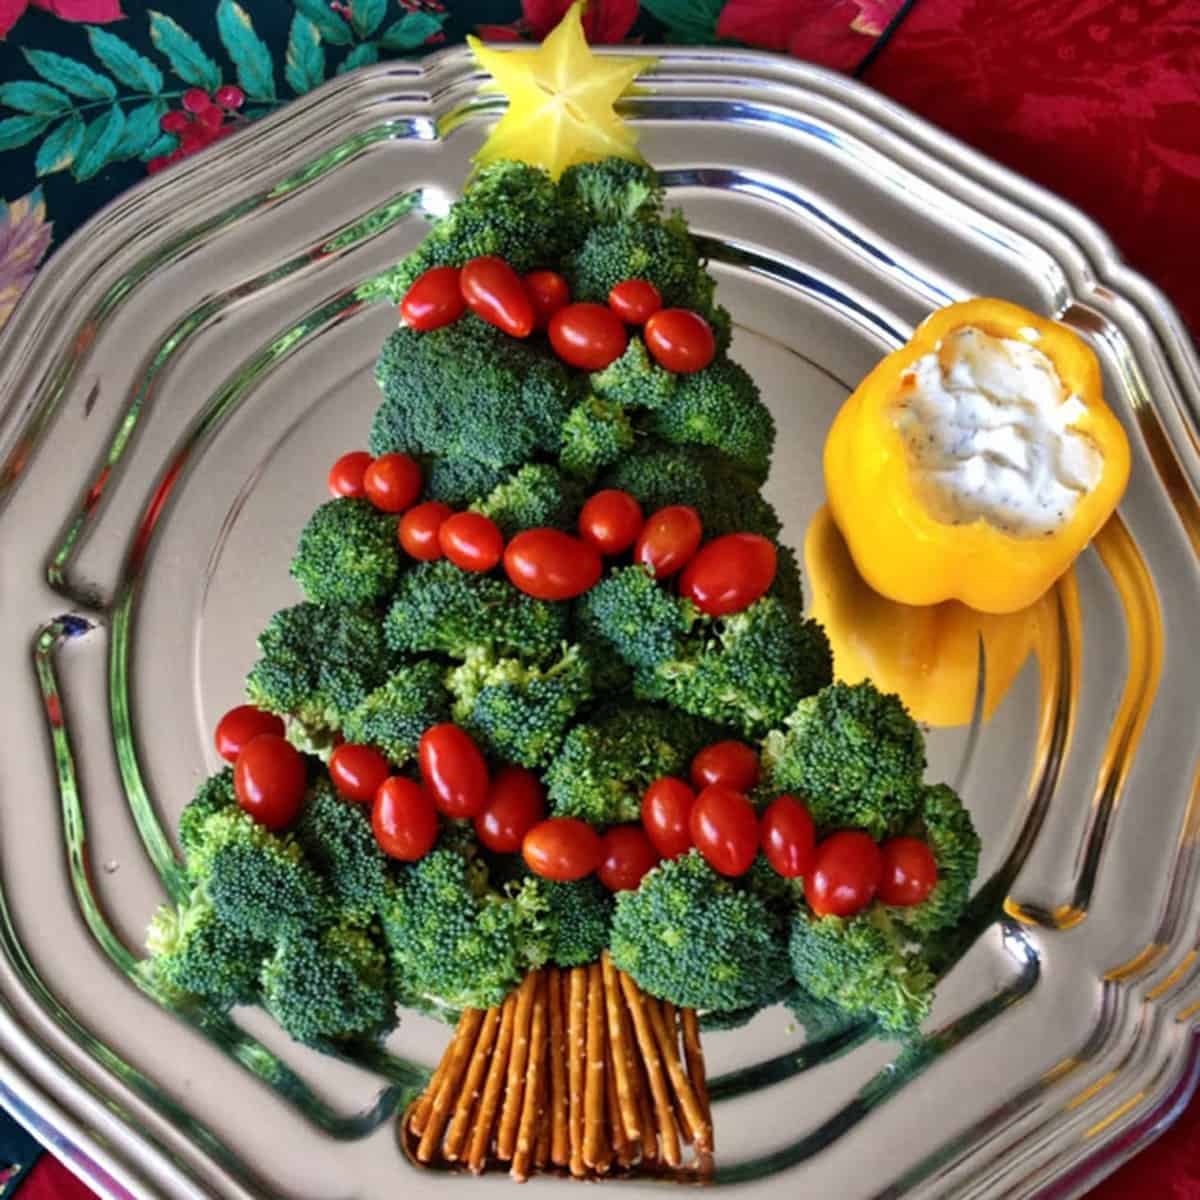 You are currently viewing 5 Tips to Add More Fruits and Vegetables this Holiday Season